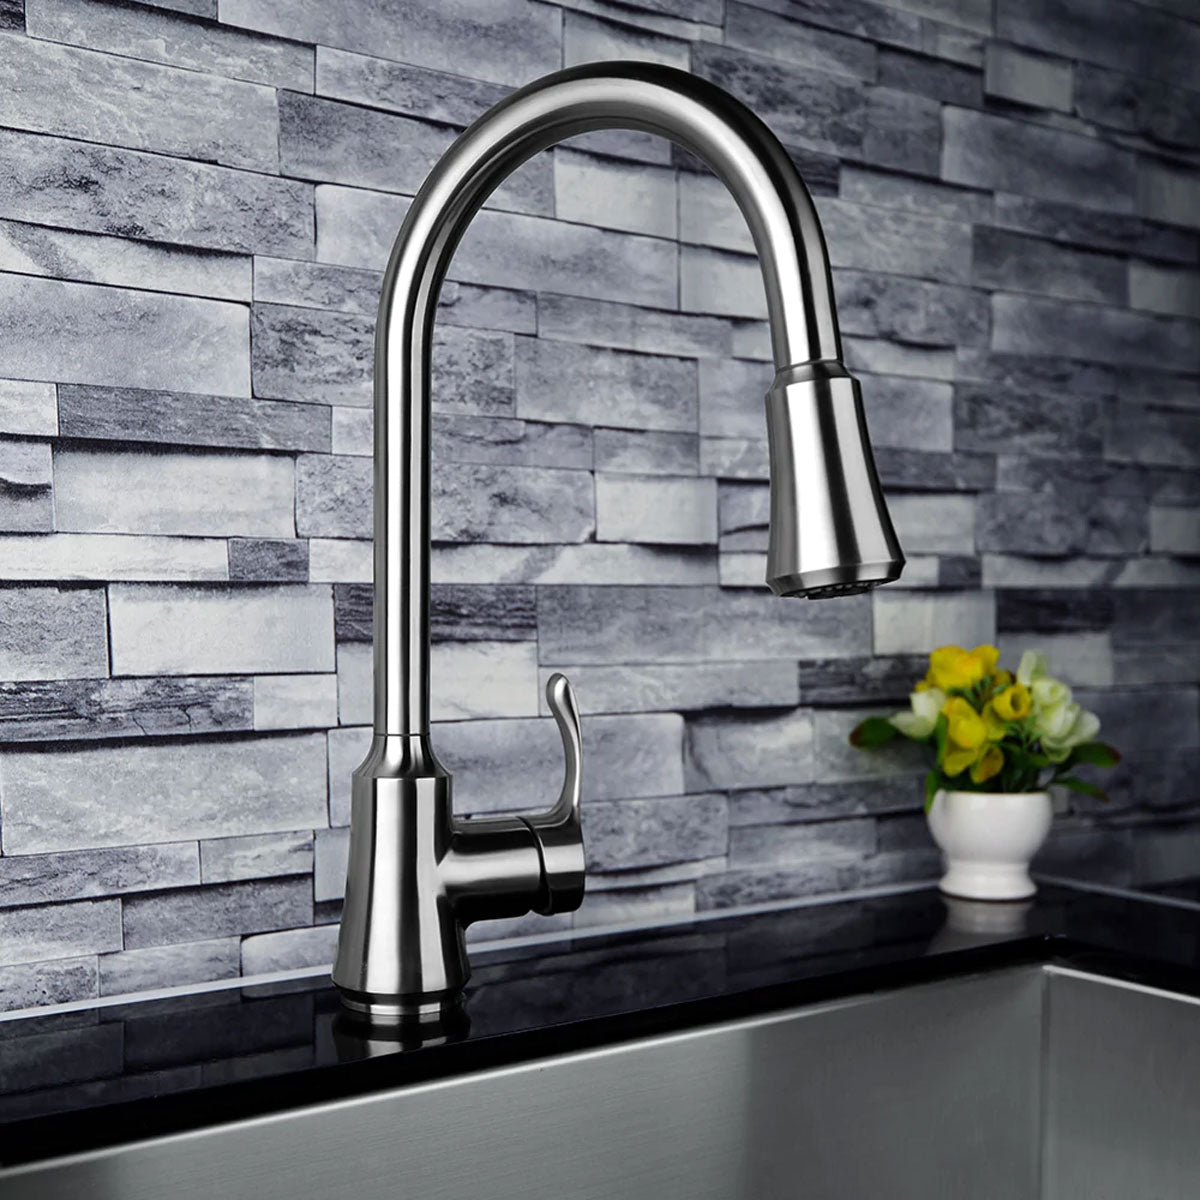 Mamie Stainless Steel Pull-Down Kitchen Faucet